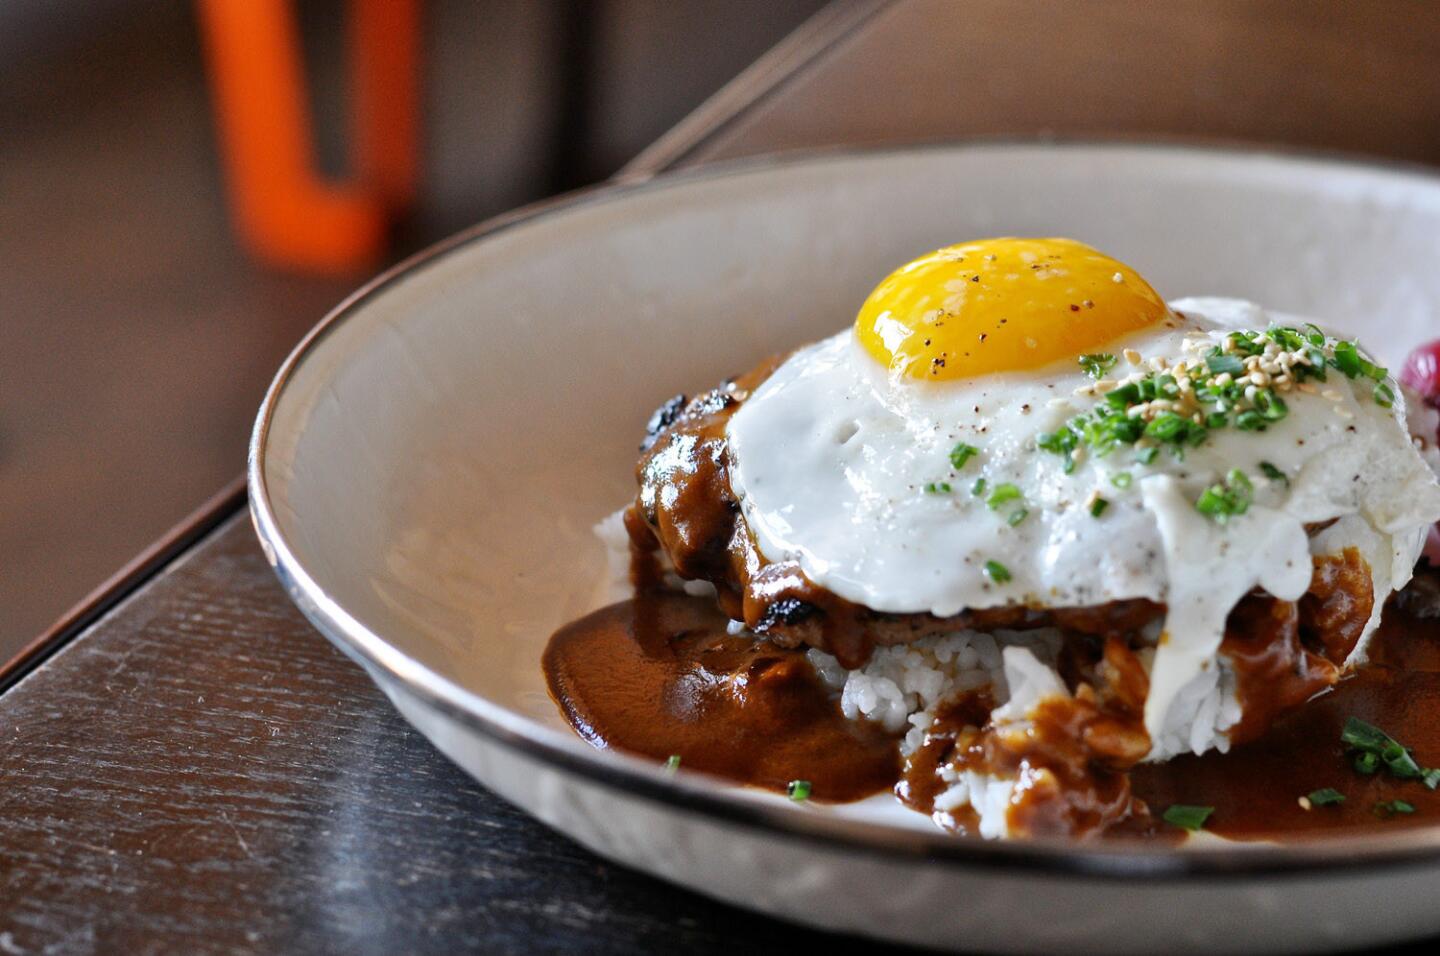 A-Frame serves the Loco Moco, with "hambagu" steak, rice, curry gravy, egg and pickled pearl onions.